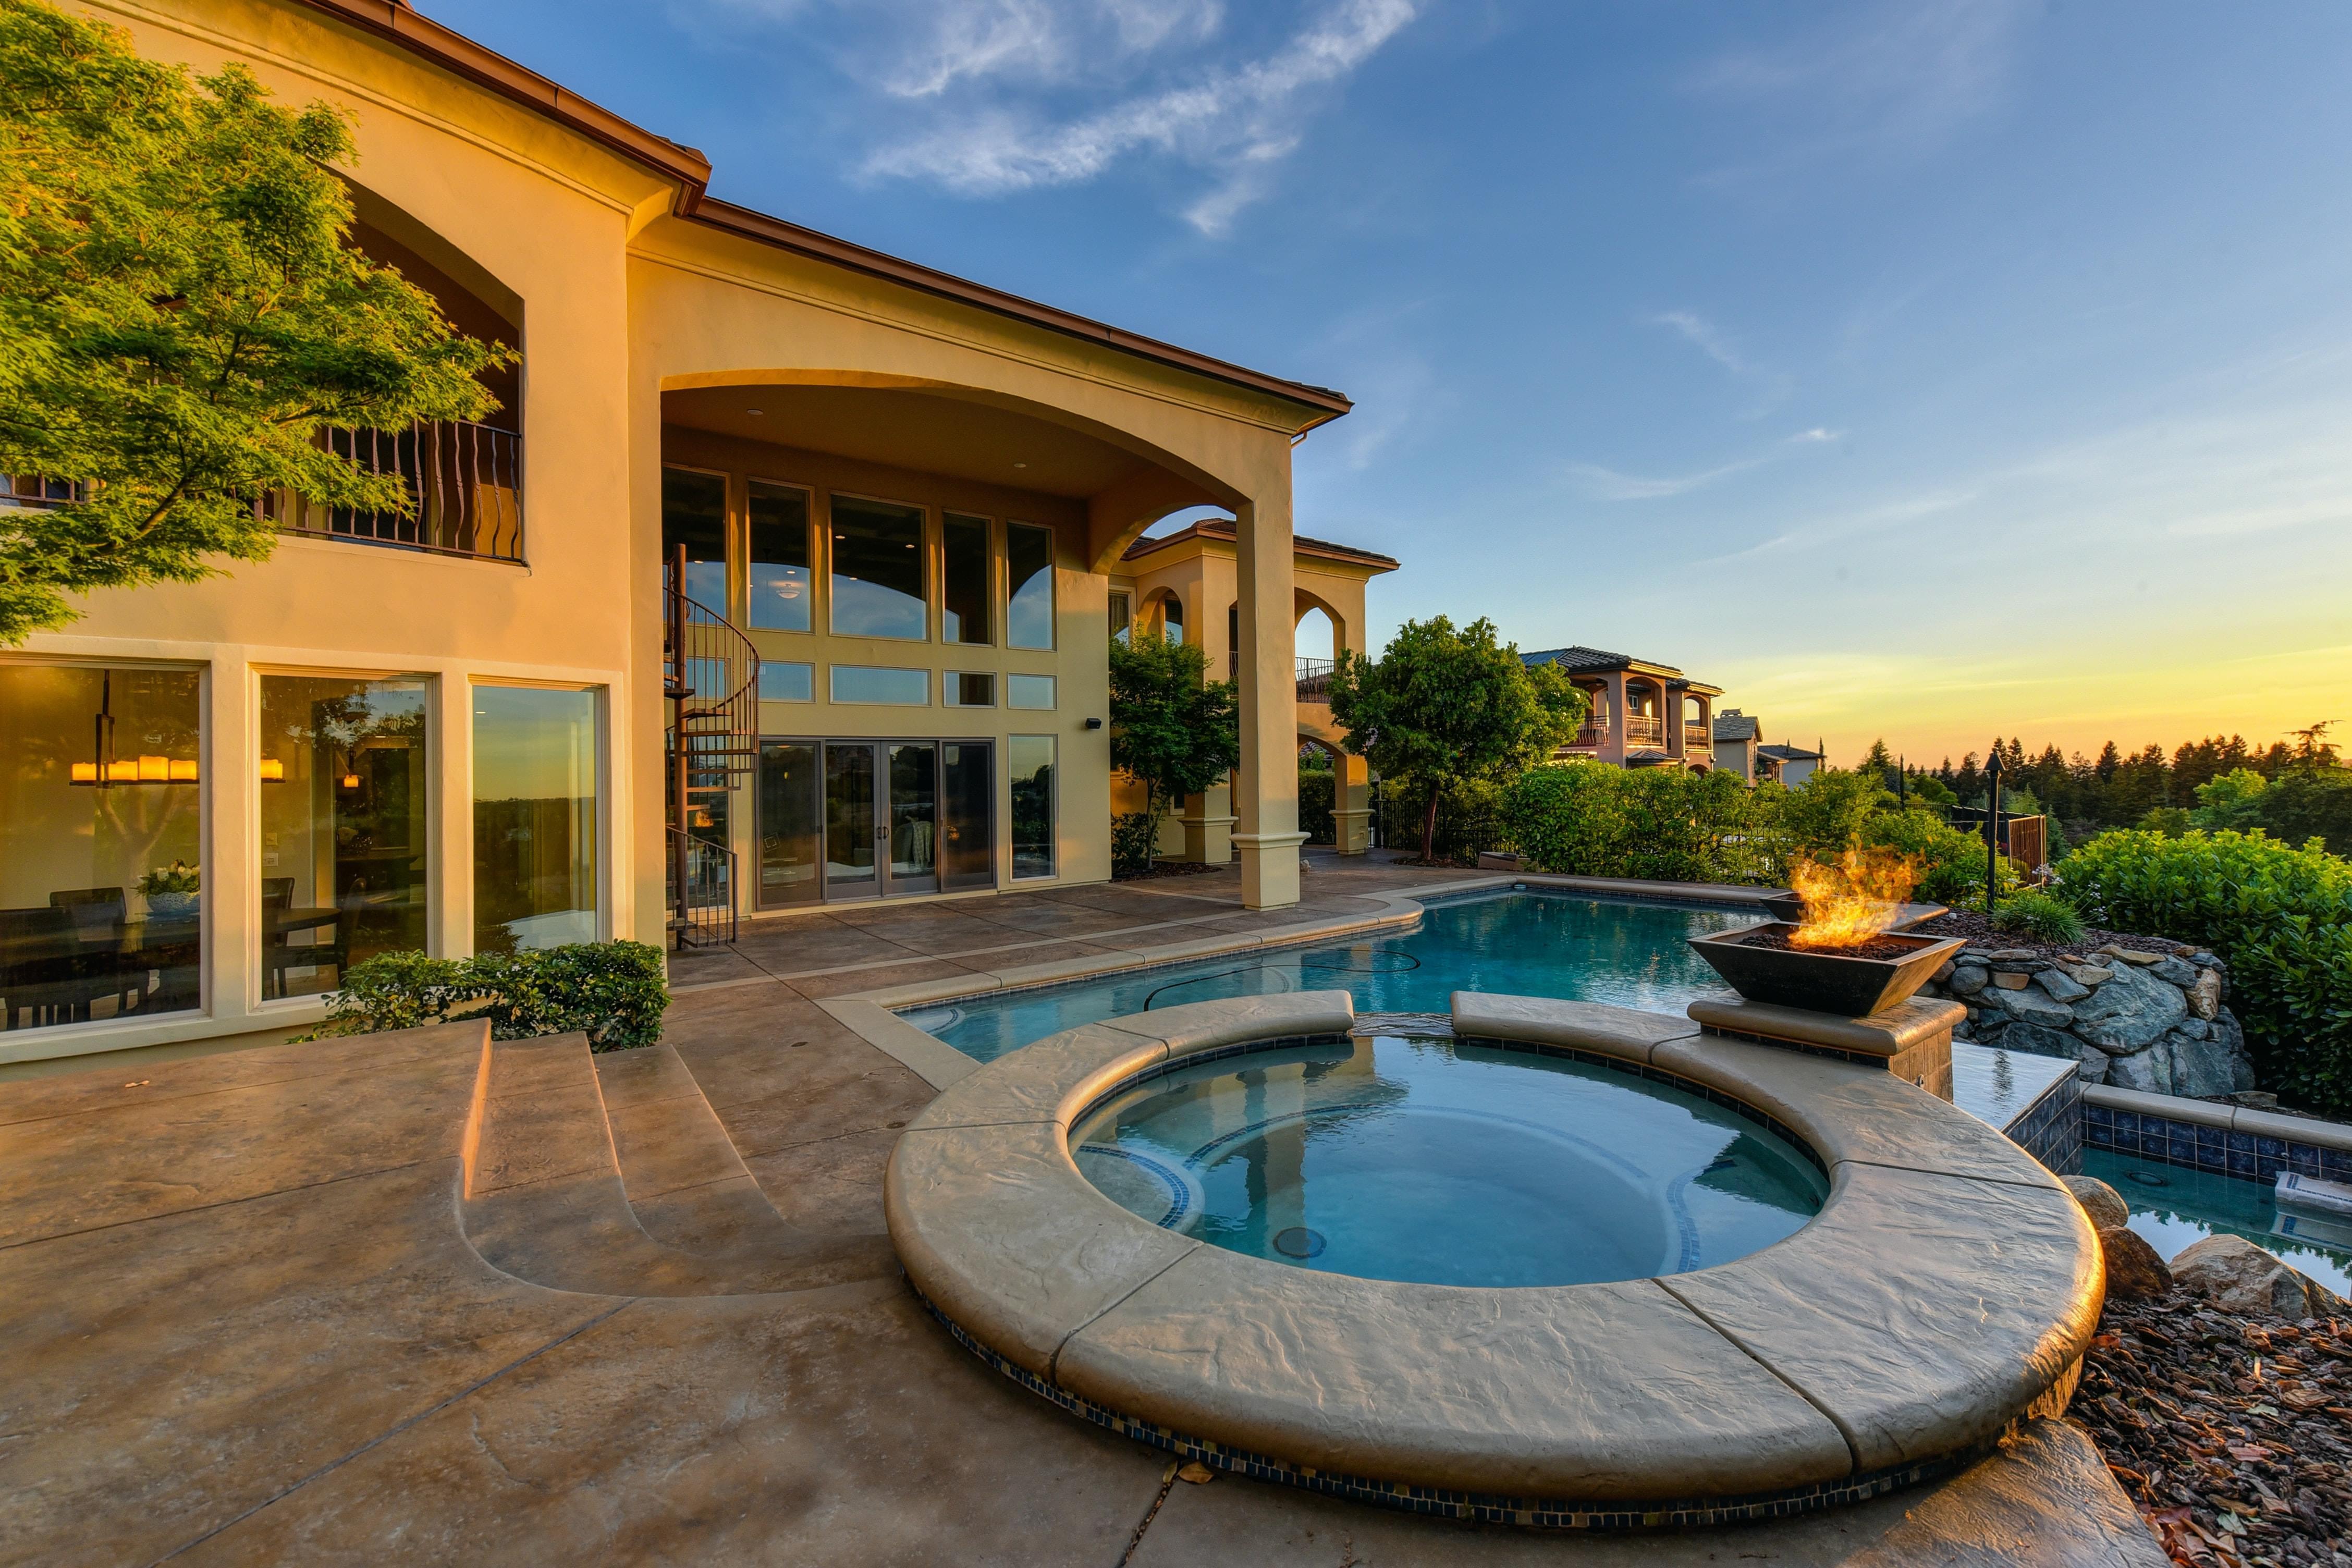 Luxury deserty home with pool and spa combination, fire pit, and floor-to-ceiling windows